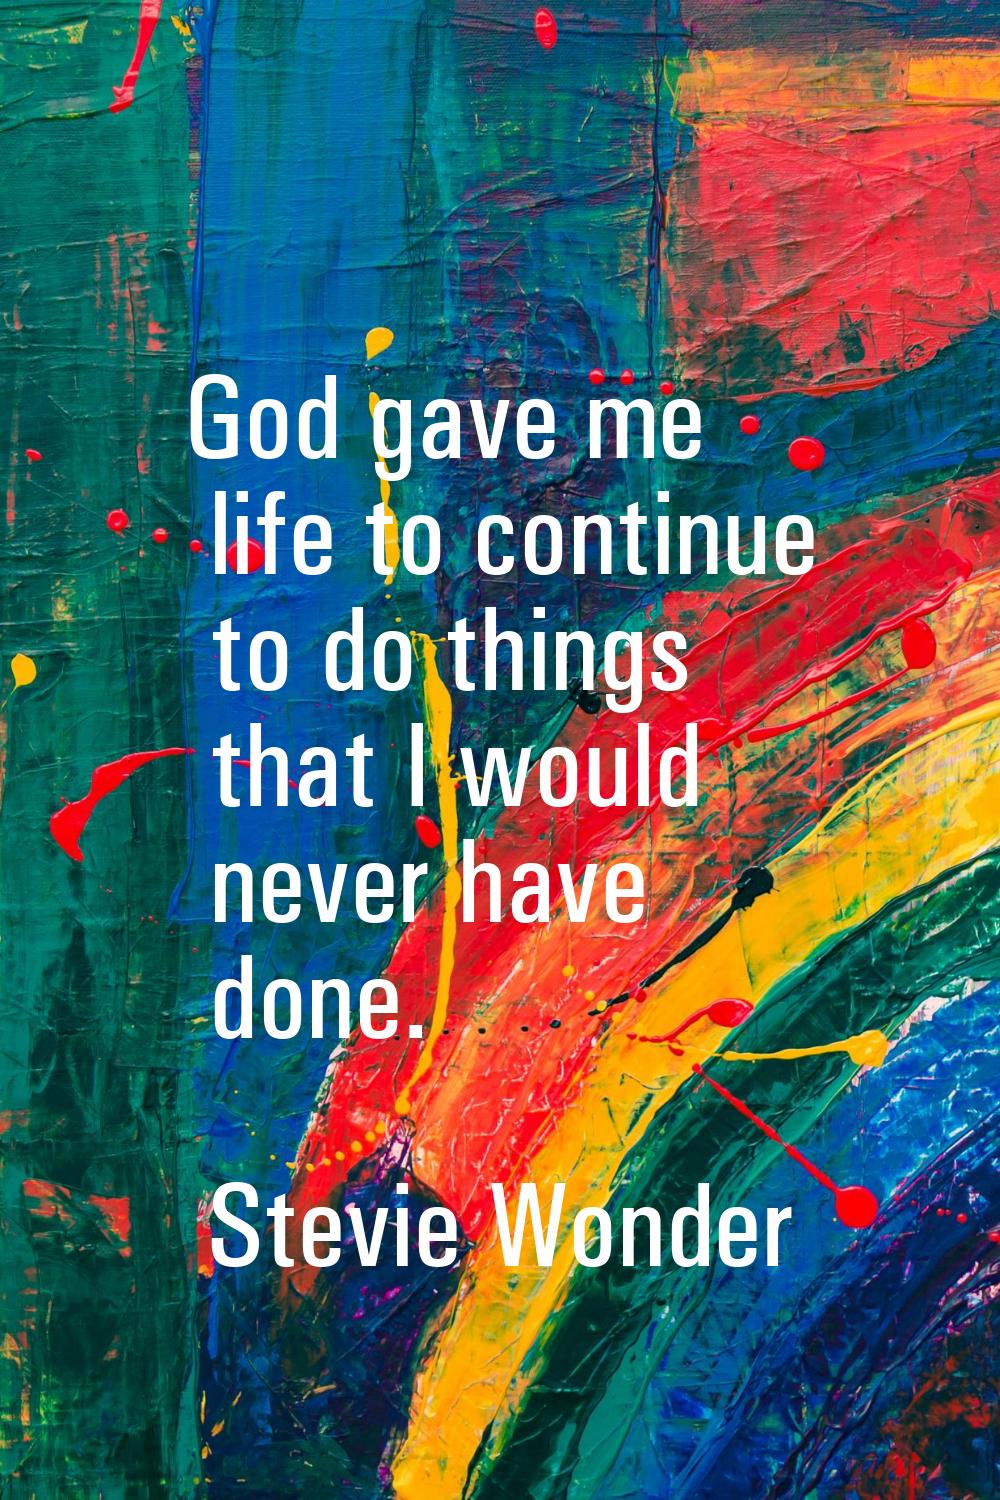 God gave me life to continue to do things that I would never have done.